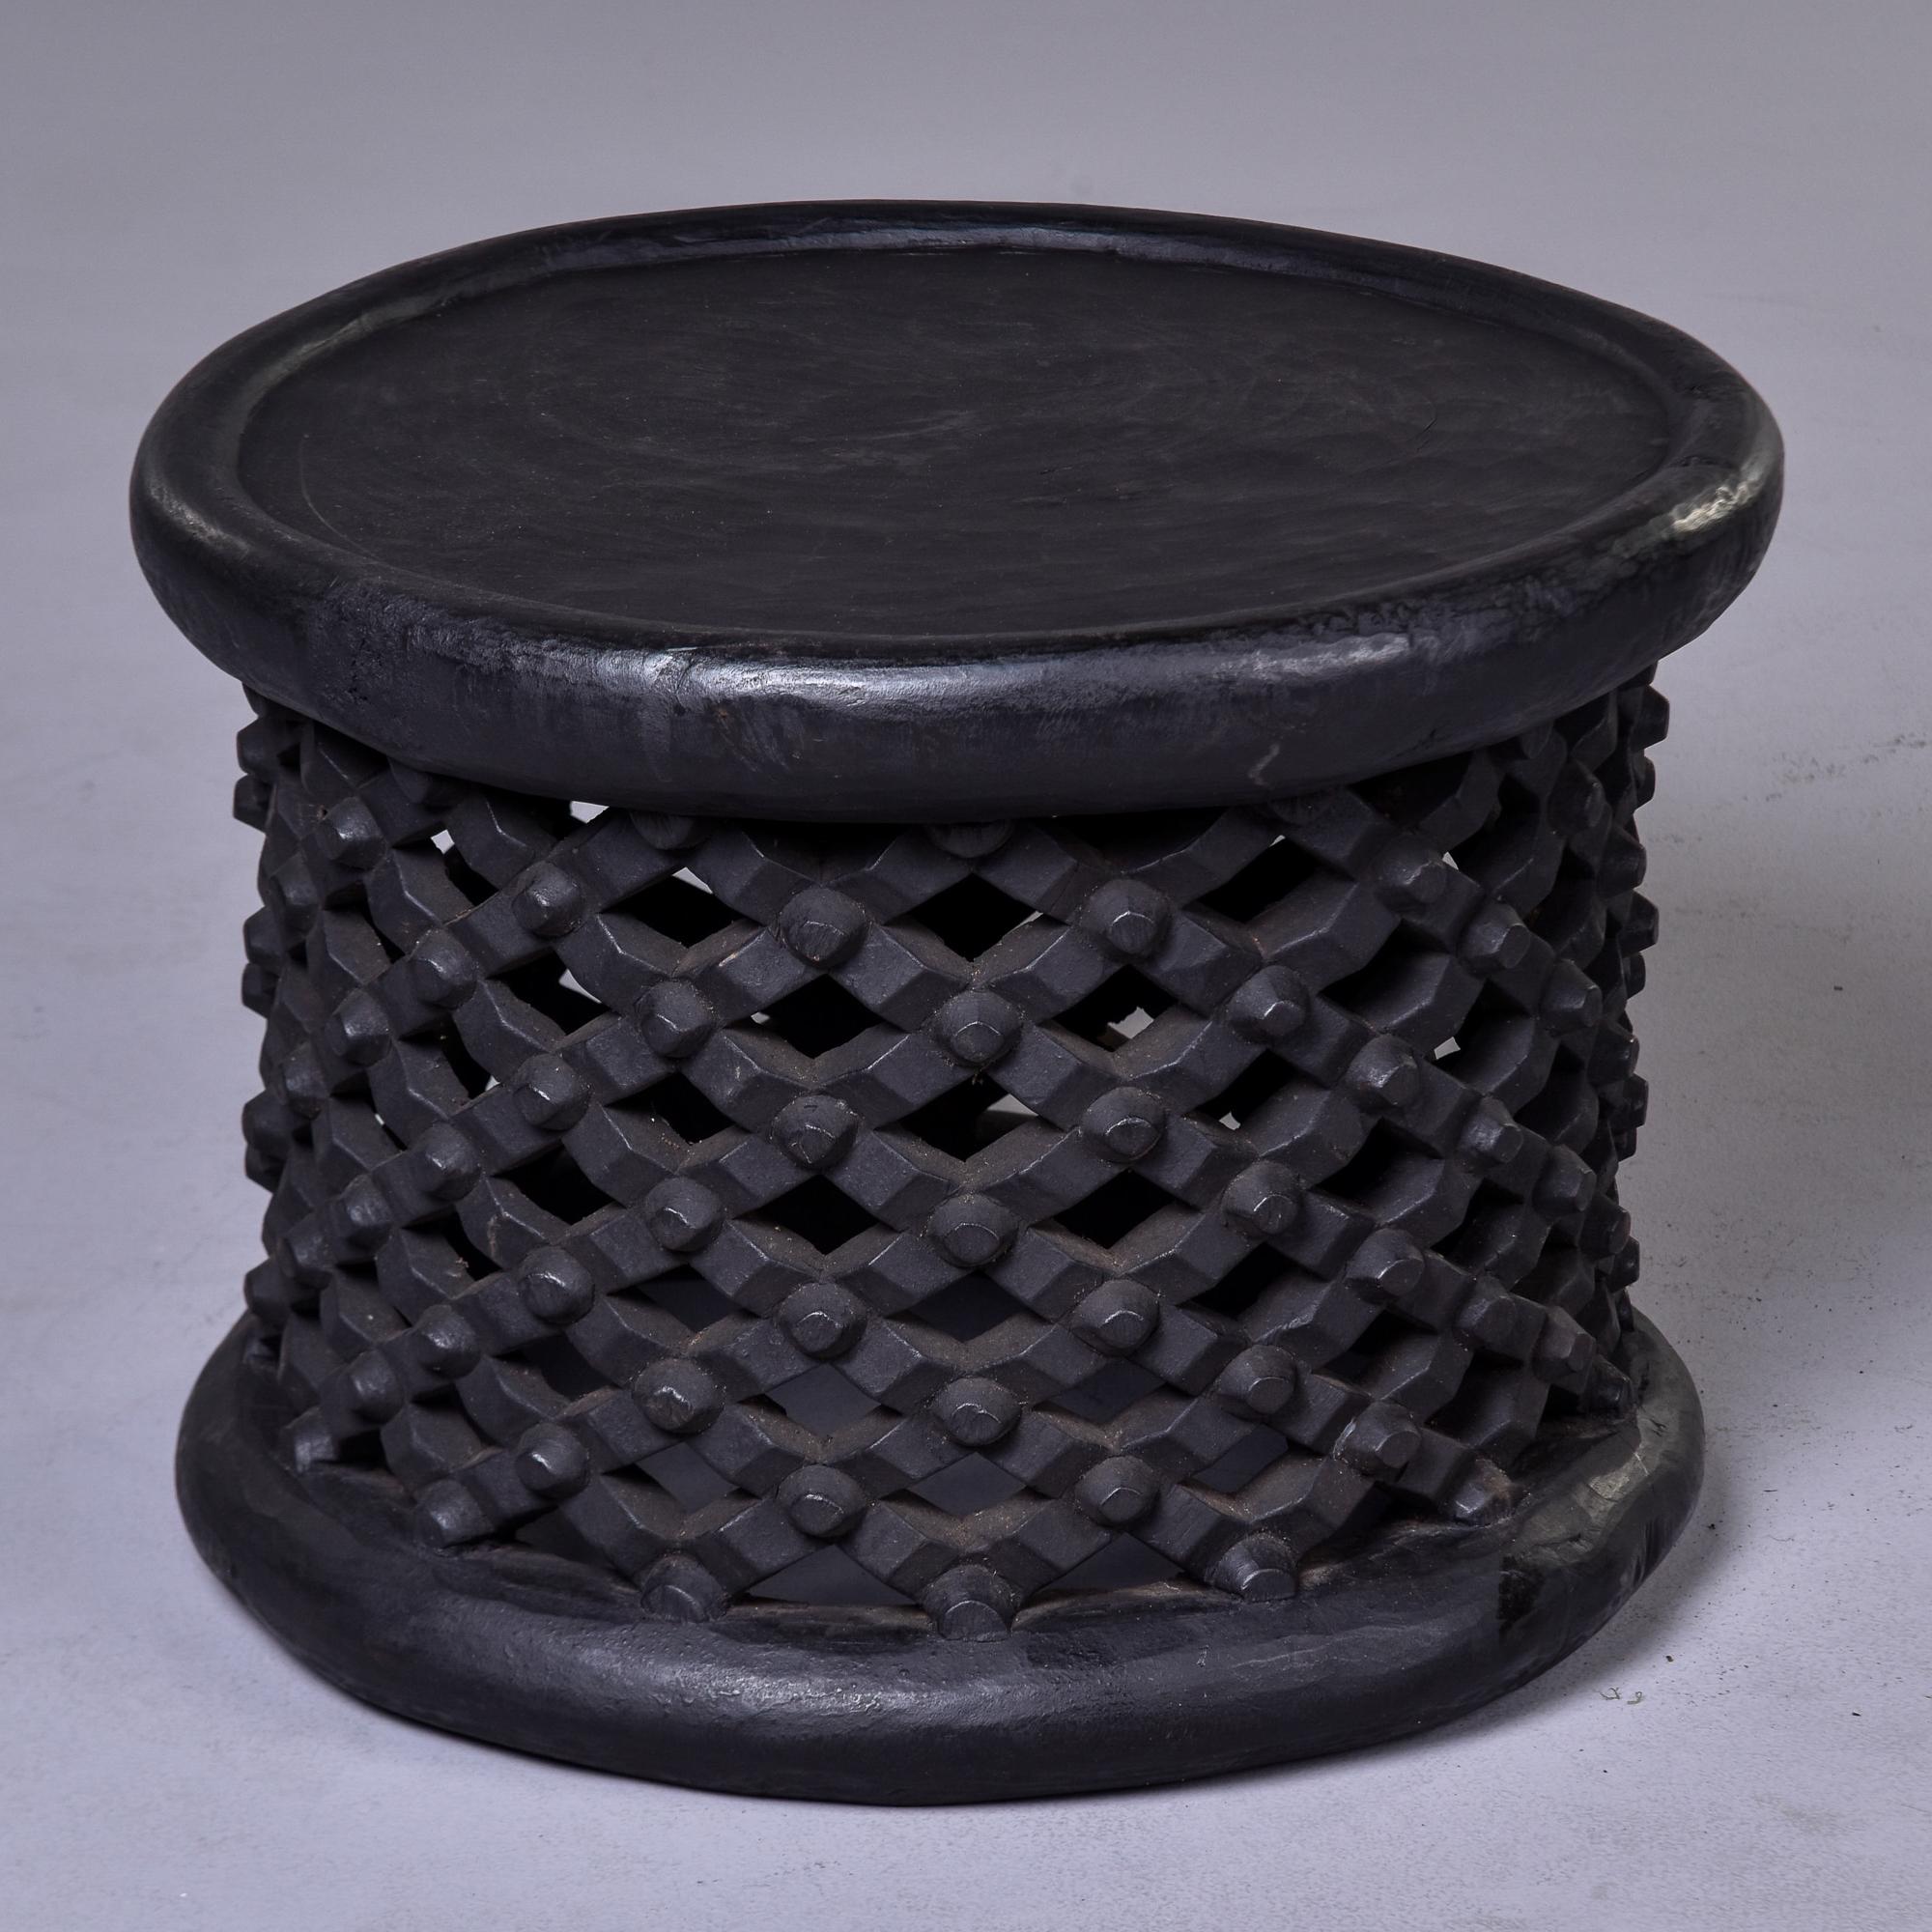 Vintage Hand Carved African Bamileke Stool or Table from Cameroon In Good Condition For Sale In Troy, MI